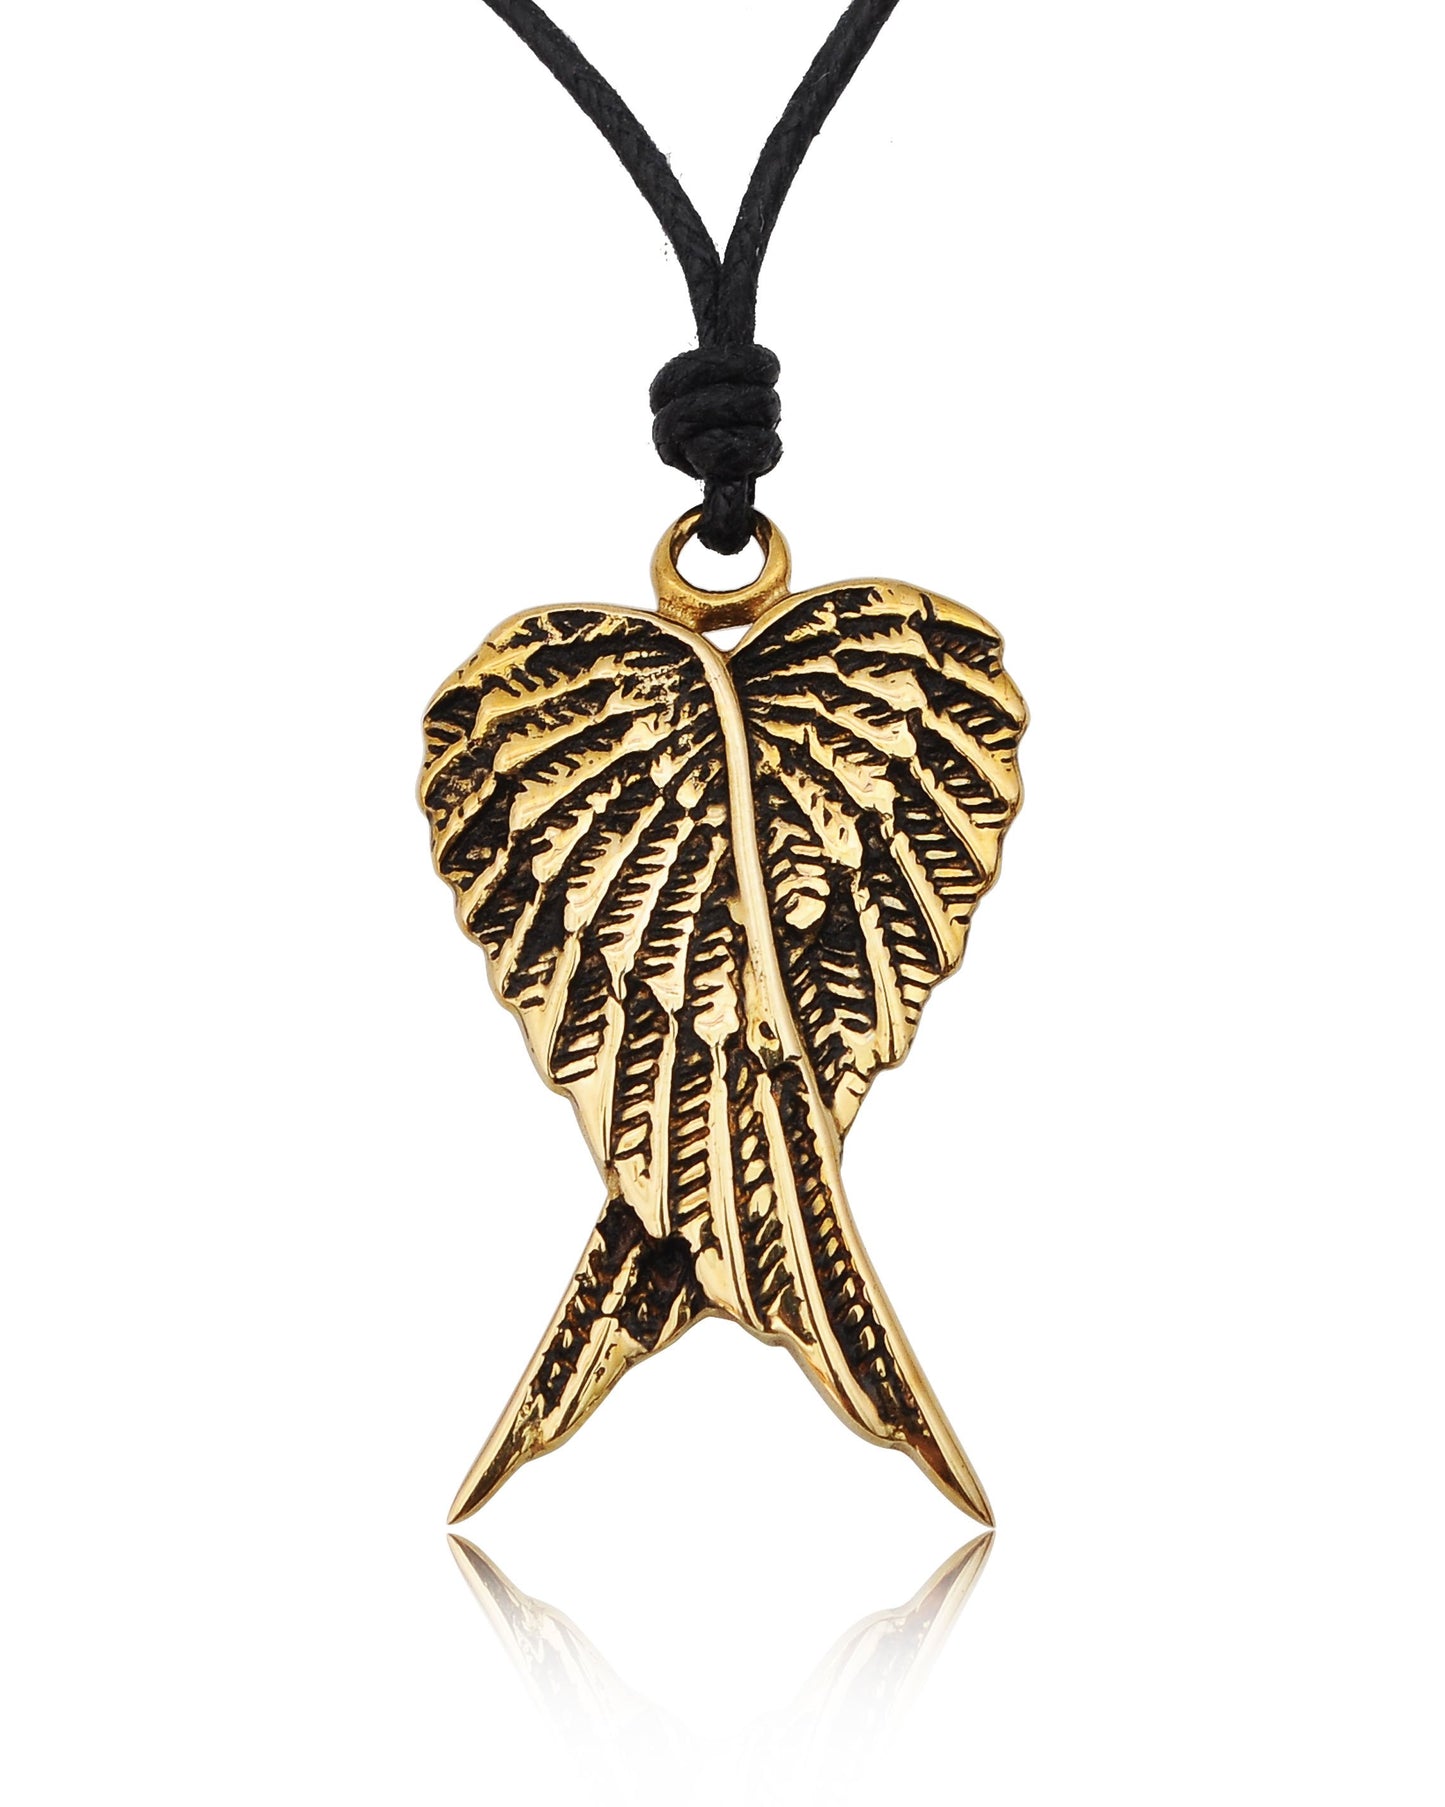 Angel's Wings Guardian Pewter Brass Charm Necklace Pendant Jewelry